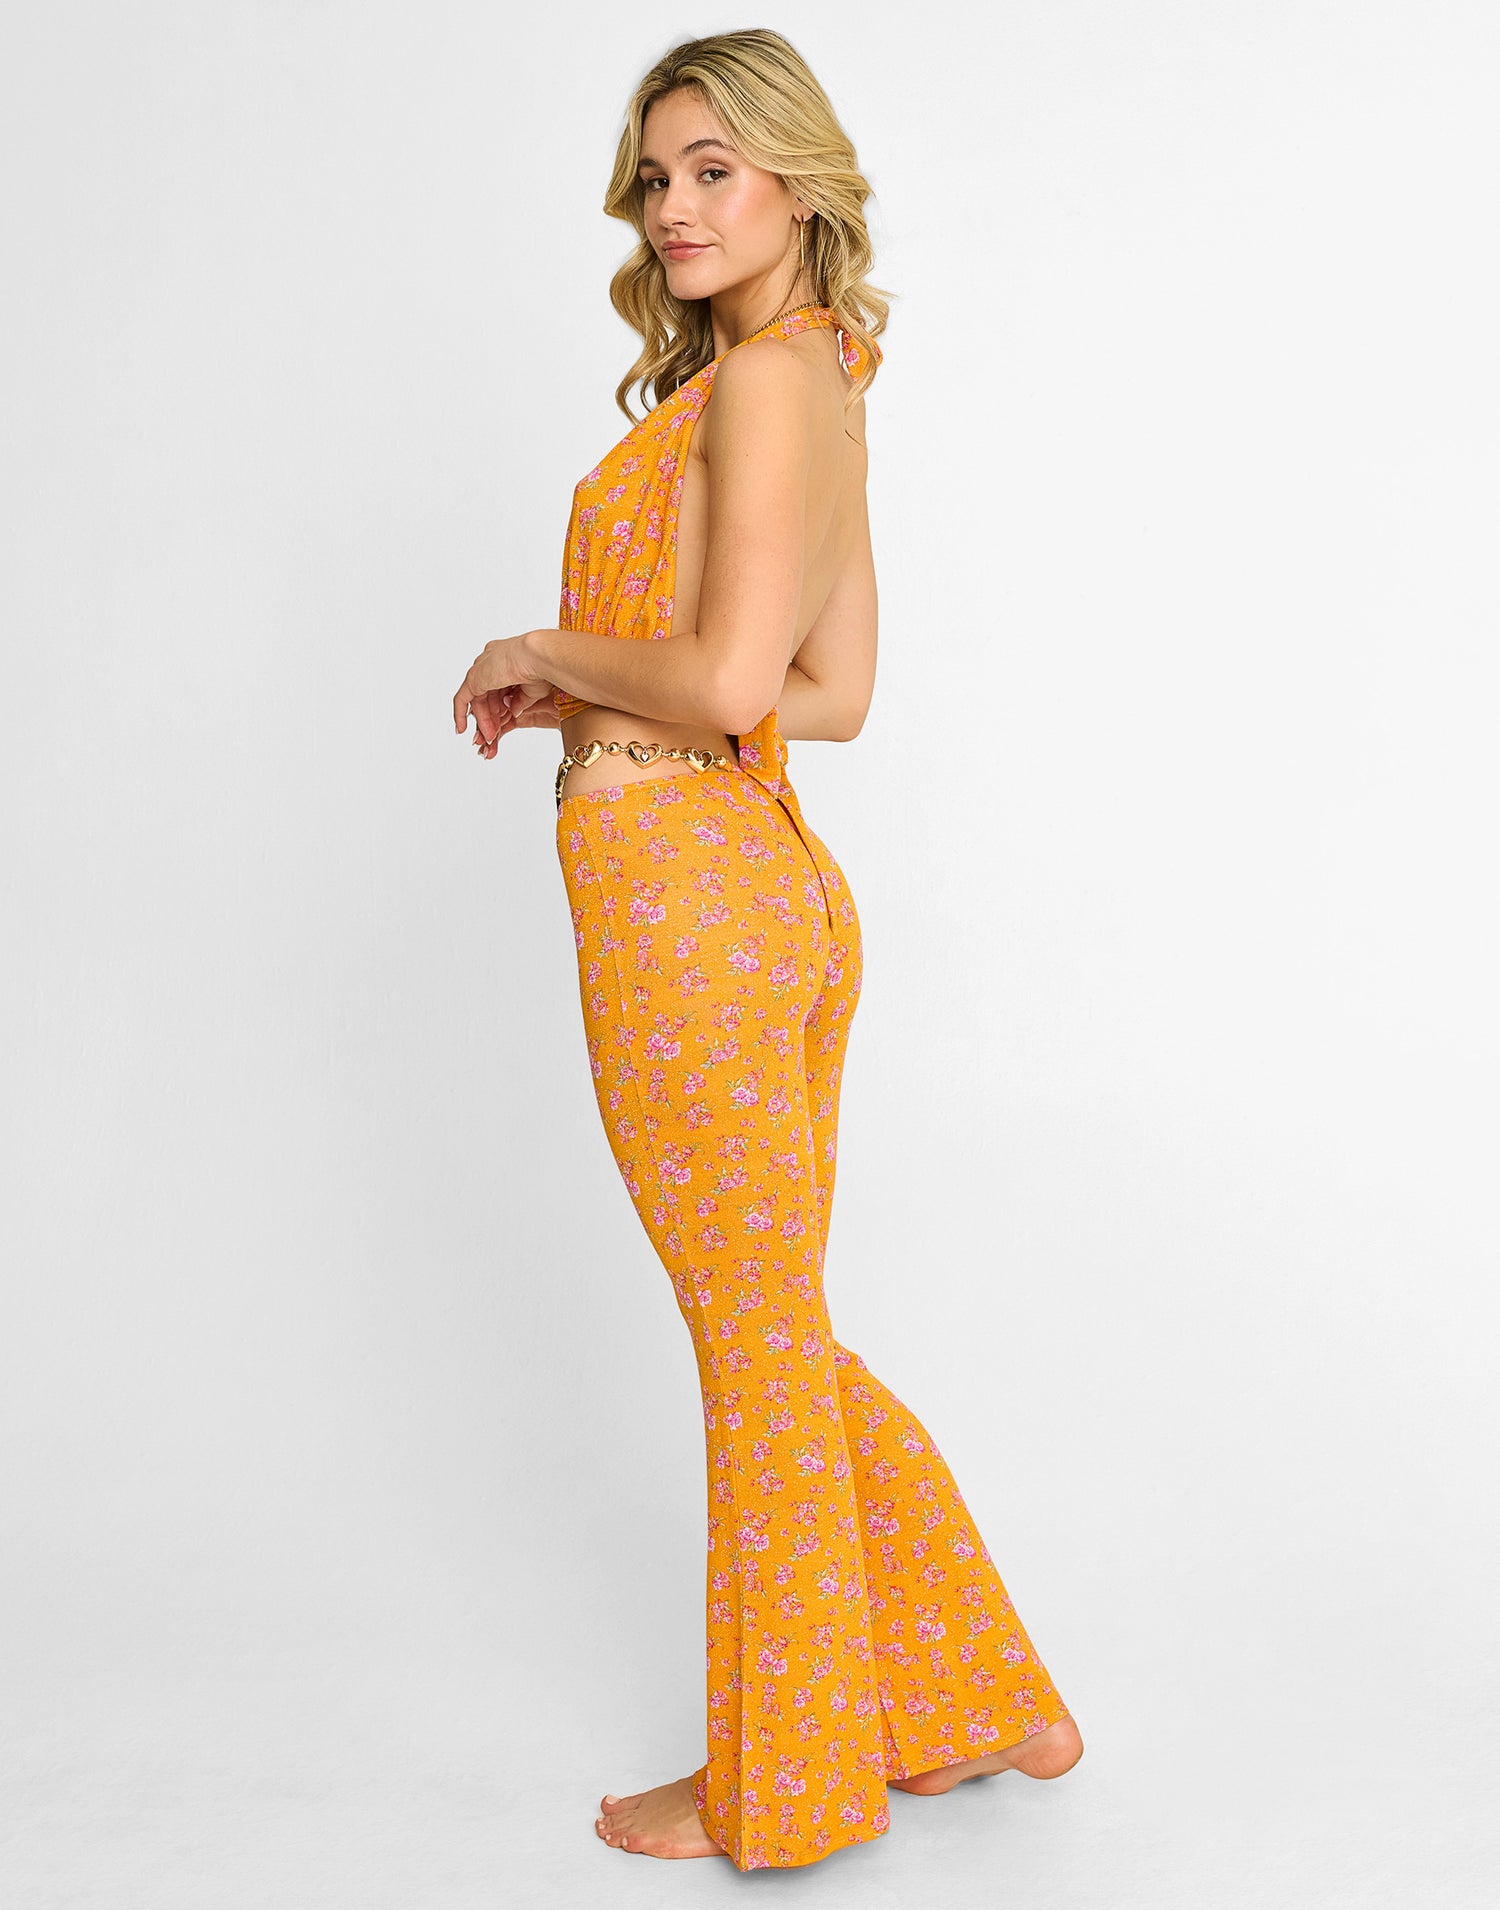 Saddie Knit Pant Cover Up in Orange Ditsy Floral with Gold Heart Hardware - Back View